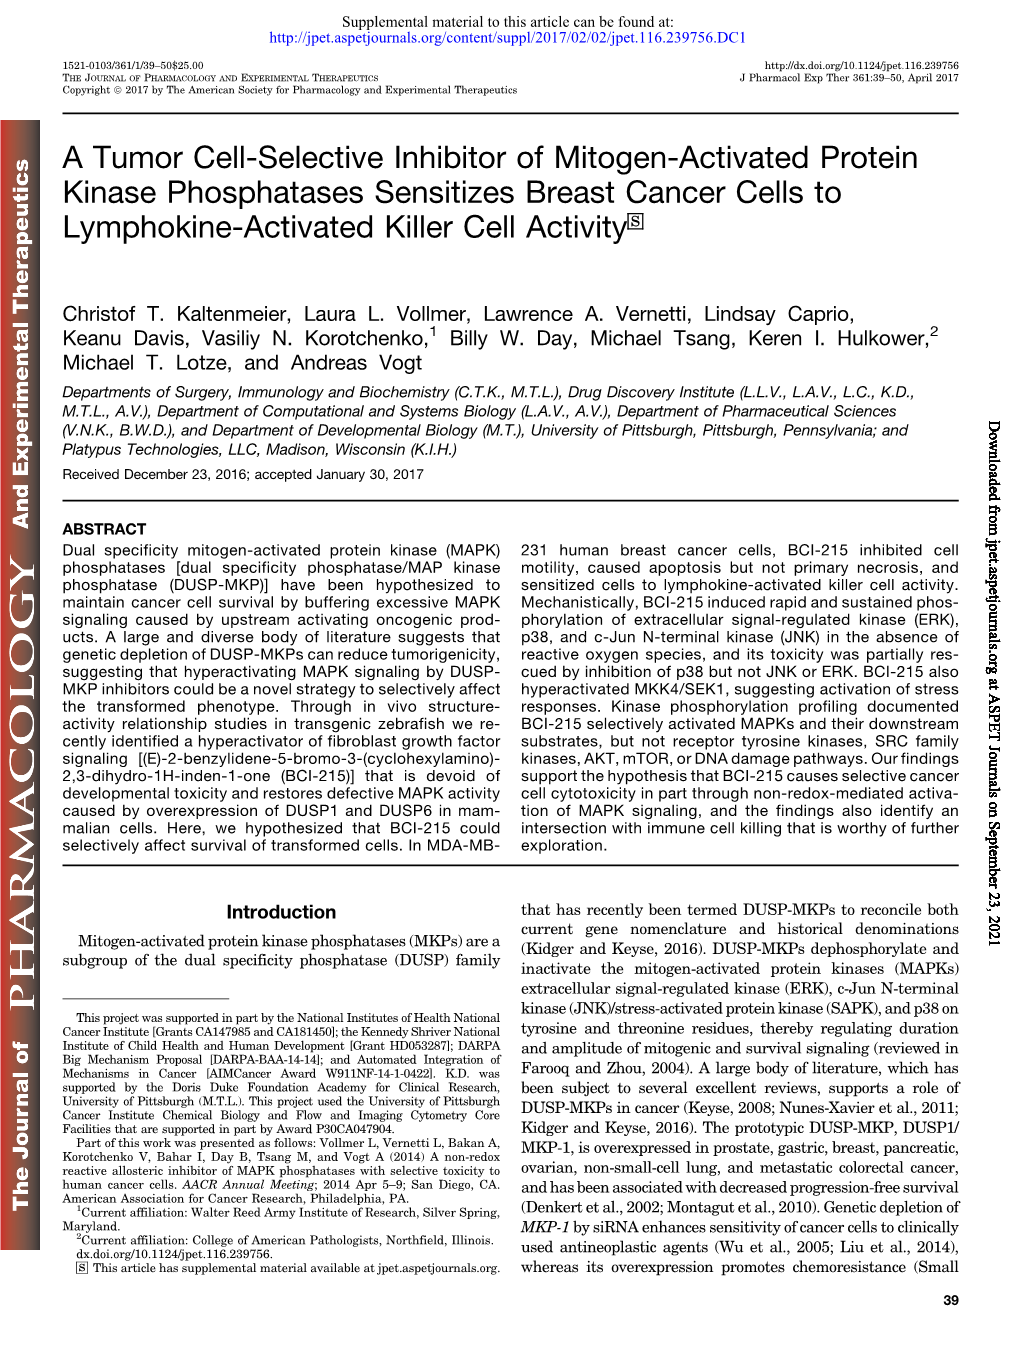 A Tumor Cell-Selective Inhibitor of Mitogen-Activated Protein Kinase Phosphatases Sensitizes Breast Cancer Cells to Lymphokine-Activated Killer Cell Activity S